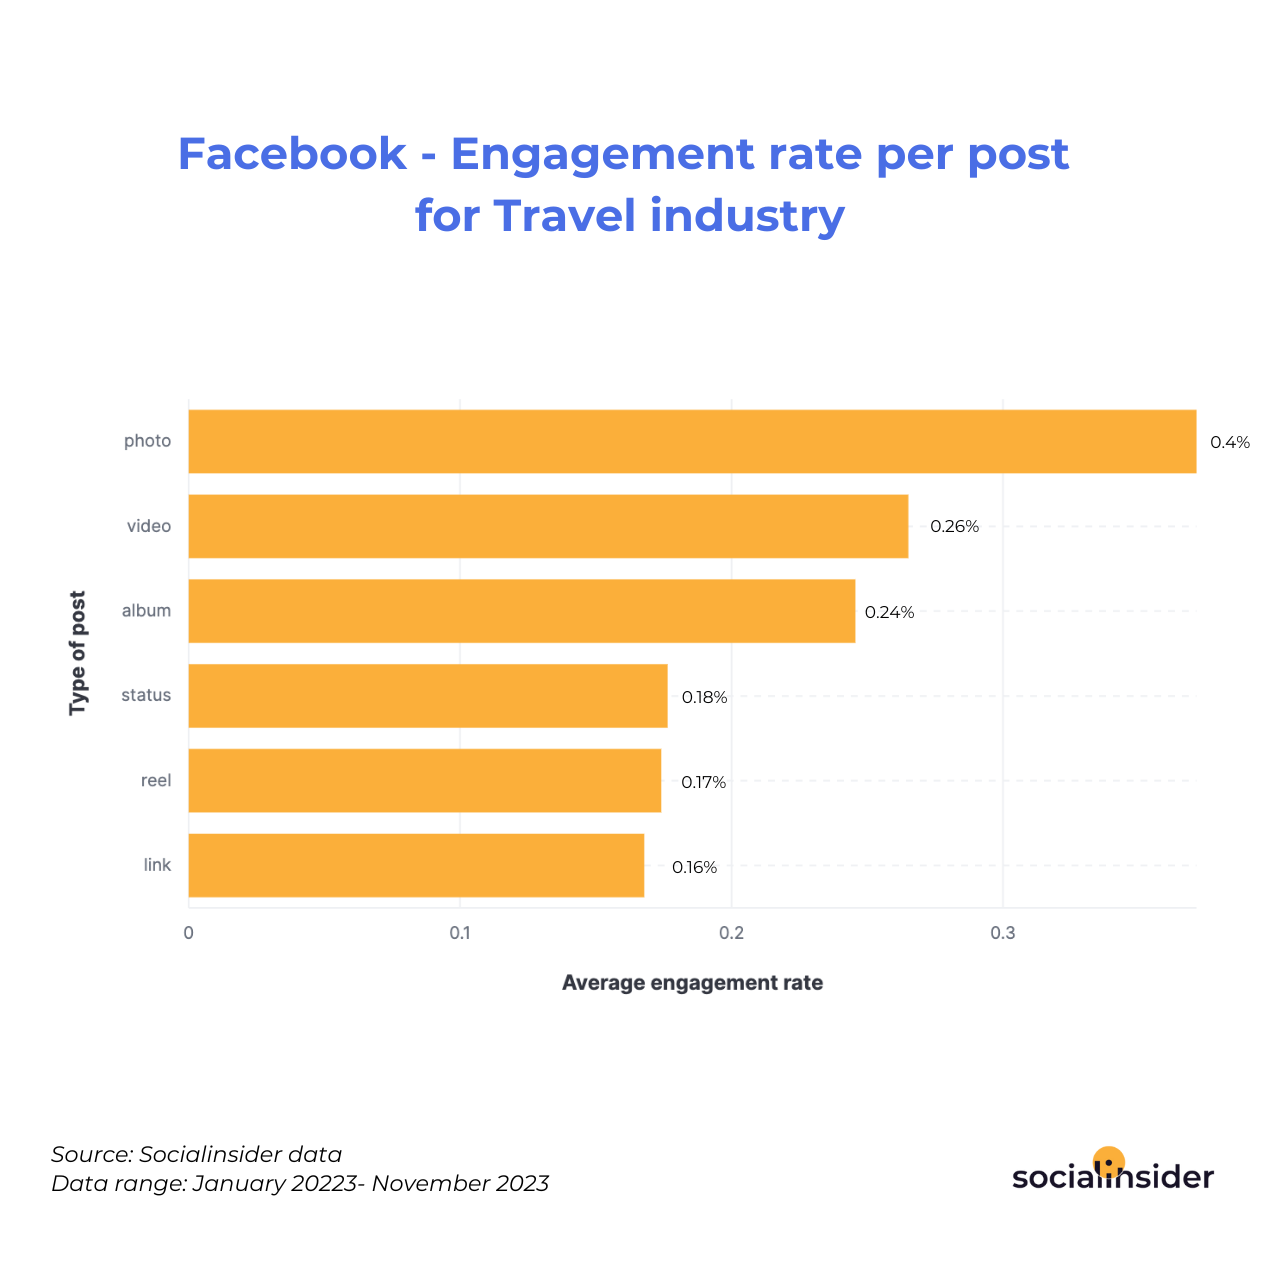 Facebook - Engagement rate per post for Travel industry